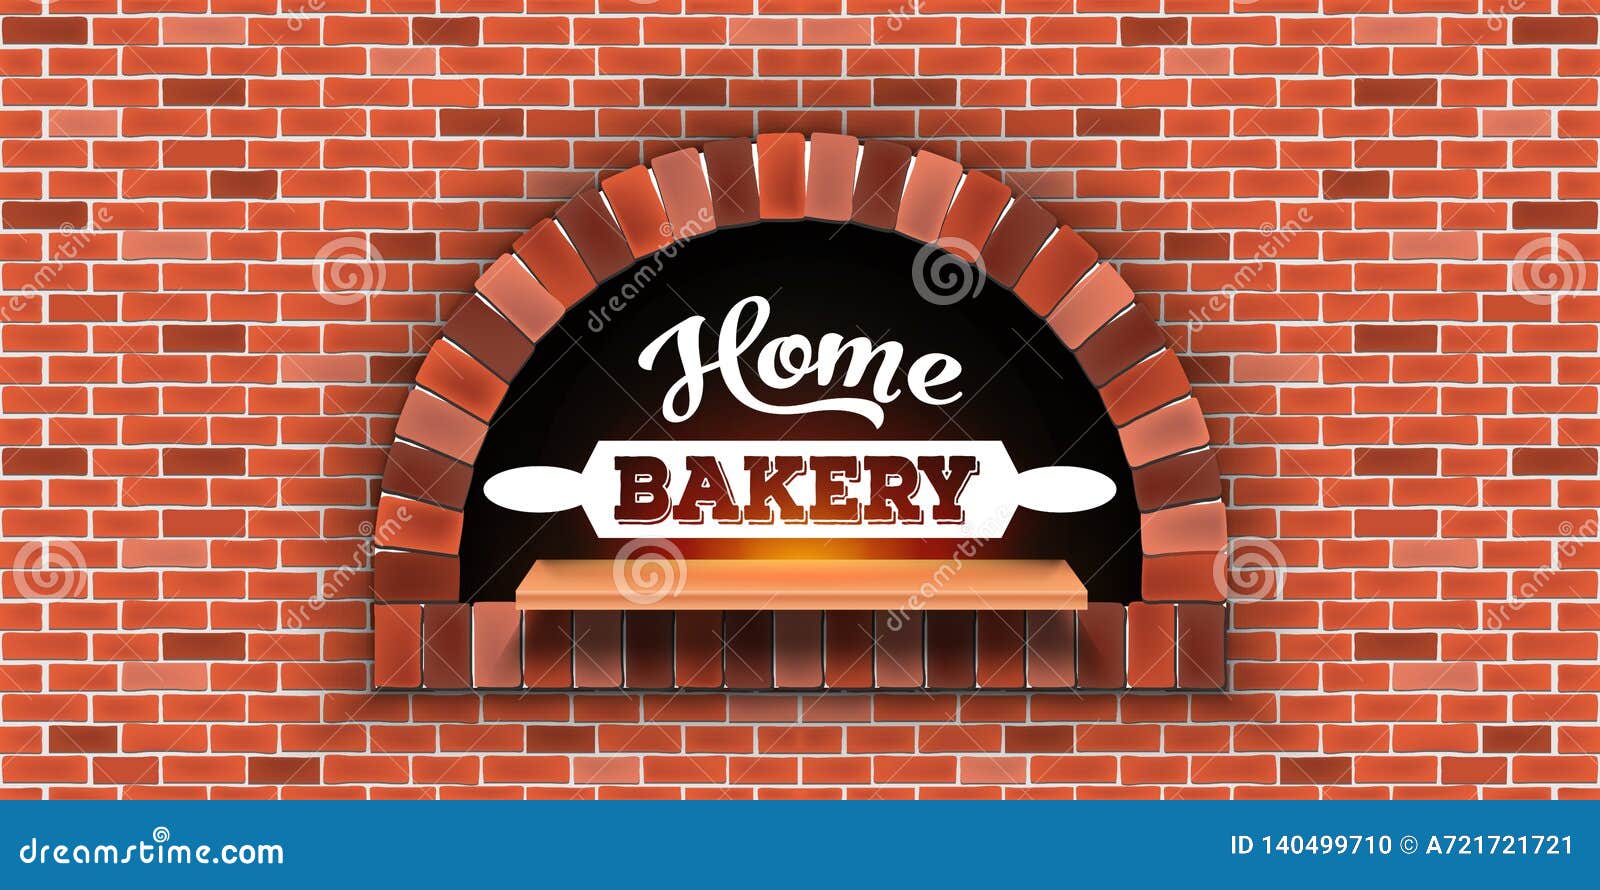 Creative Vector Illustration Of Stone Brick, Pizza Firewood Oven With ...